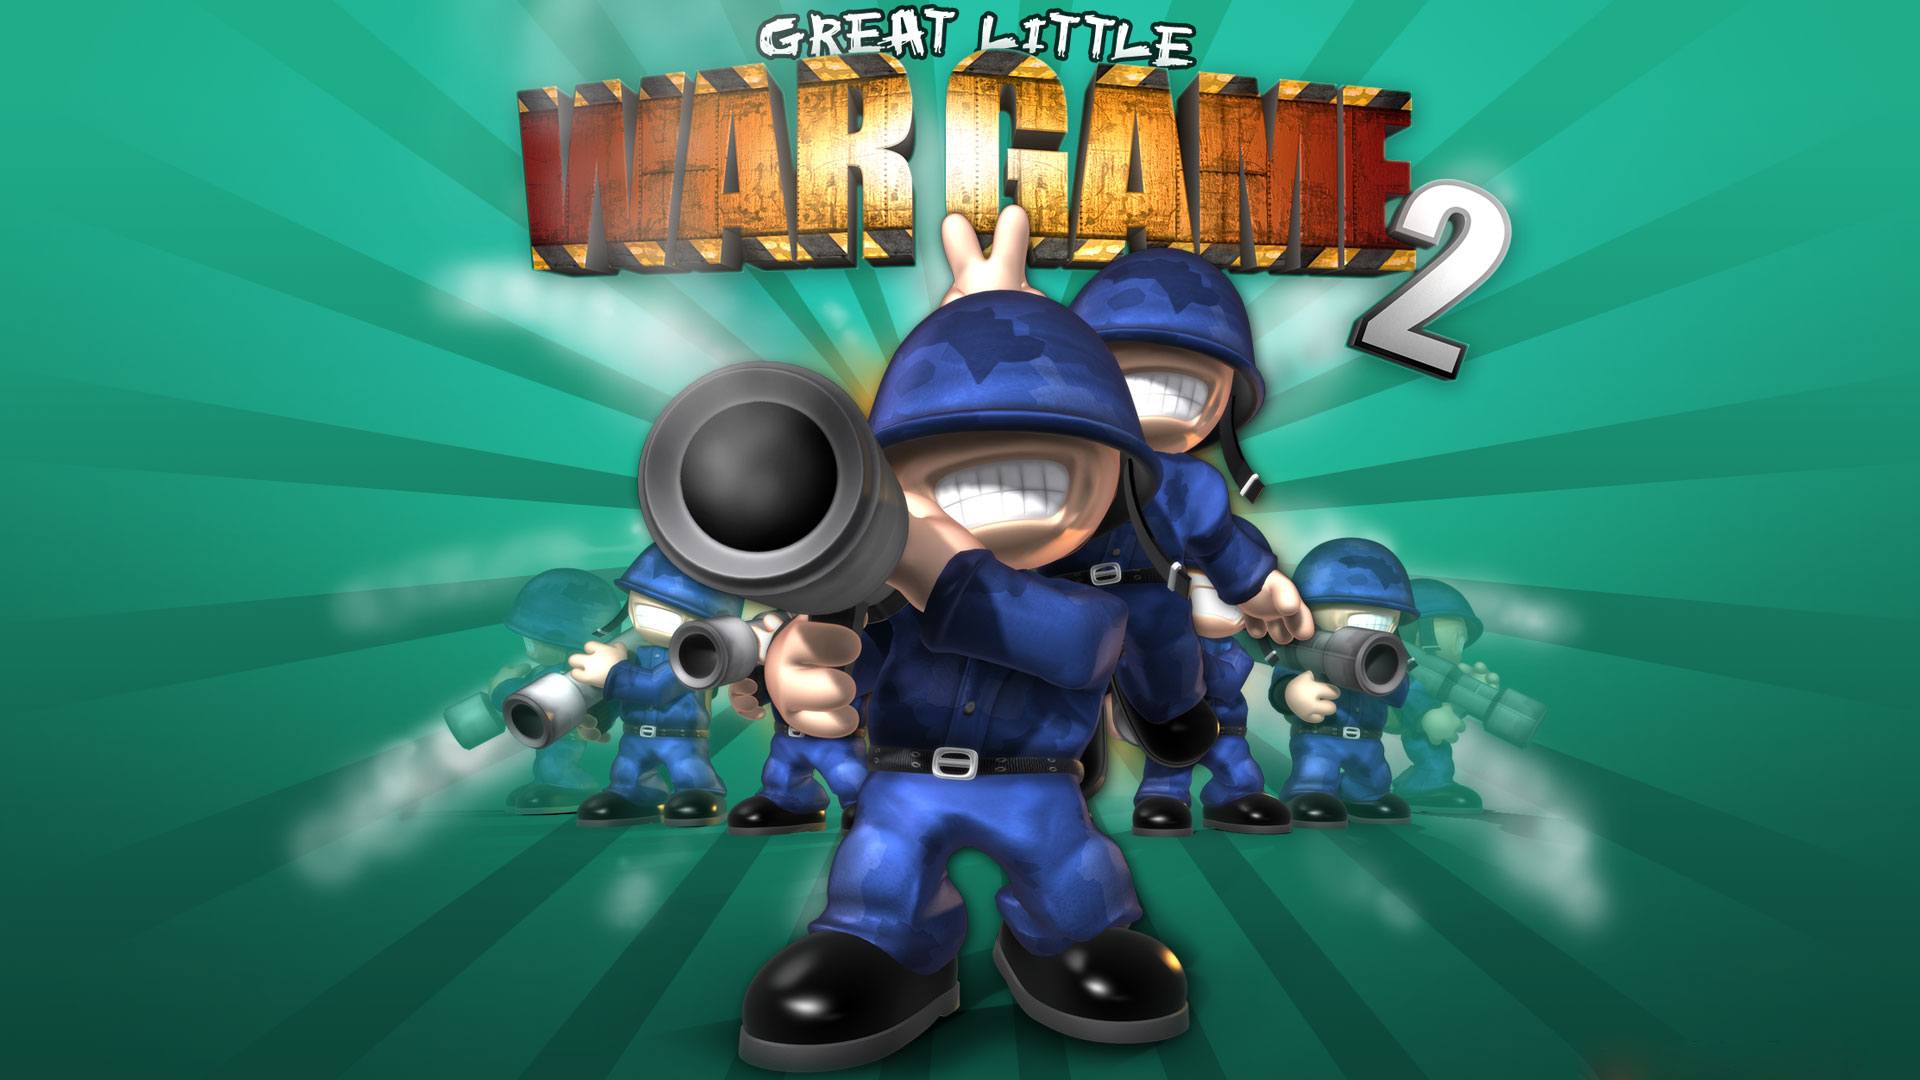 Great little war game free